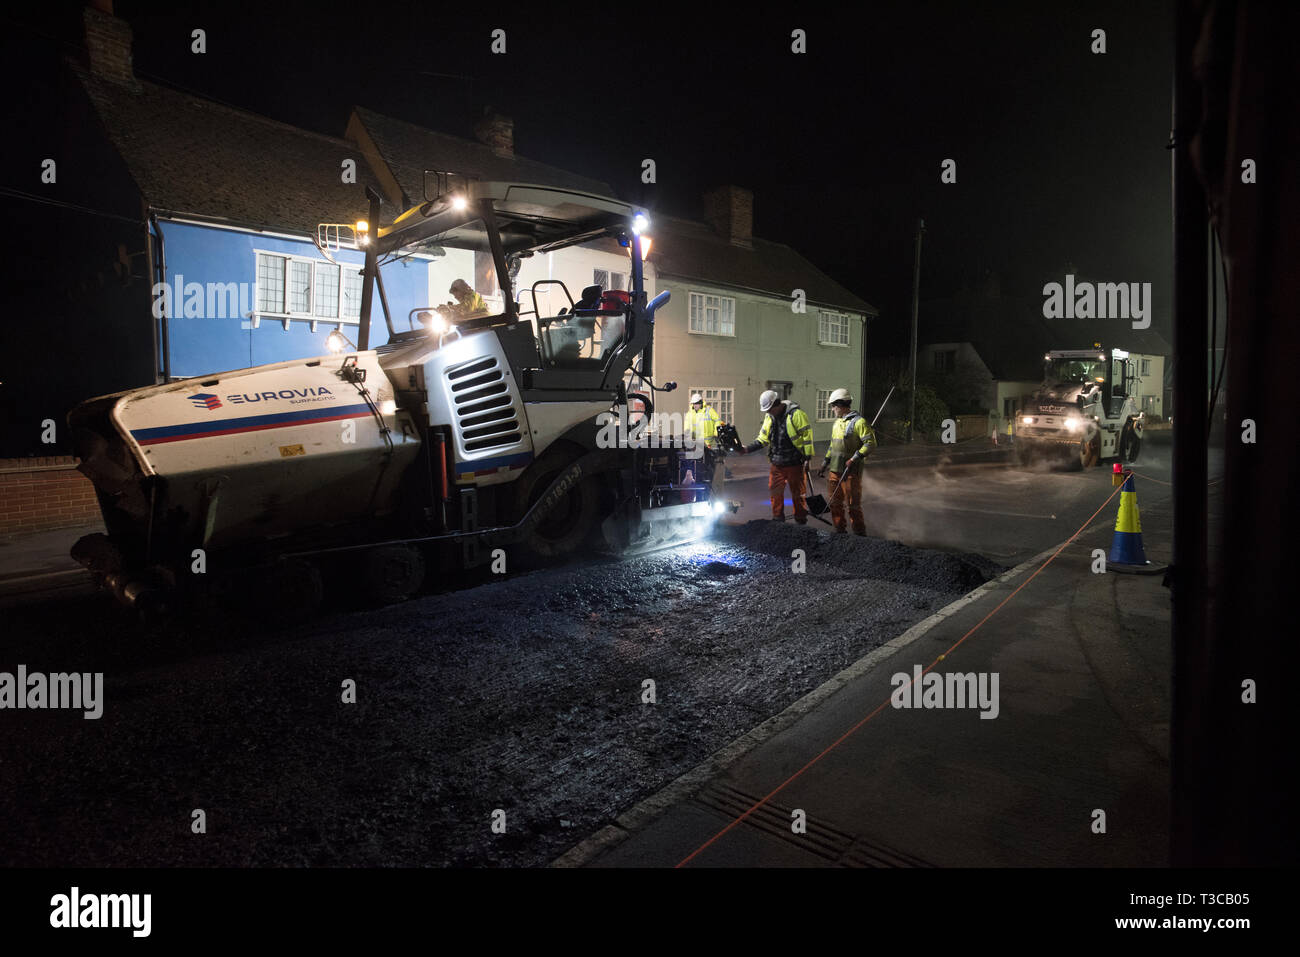 Thaxted Essex England UK. Major resurfacing work for 7 nights 5 April to 12 April 2019 Night Work: Photograph shows the busy night scene as workers fr Stock Photo